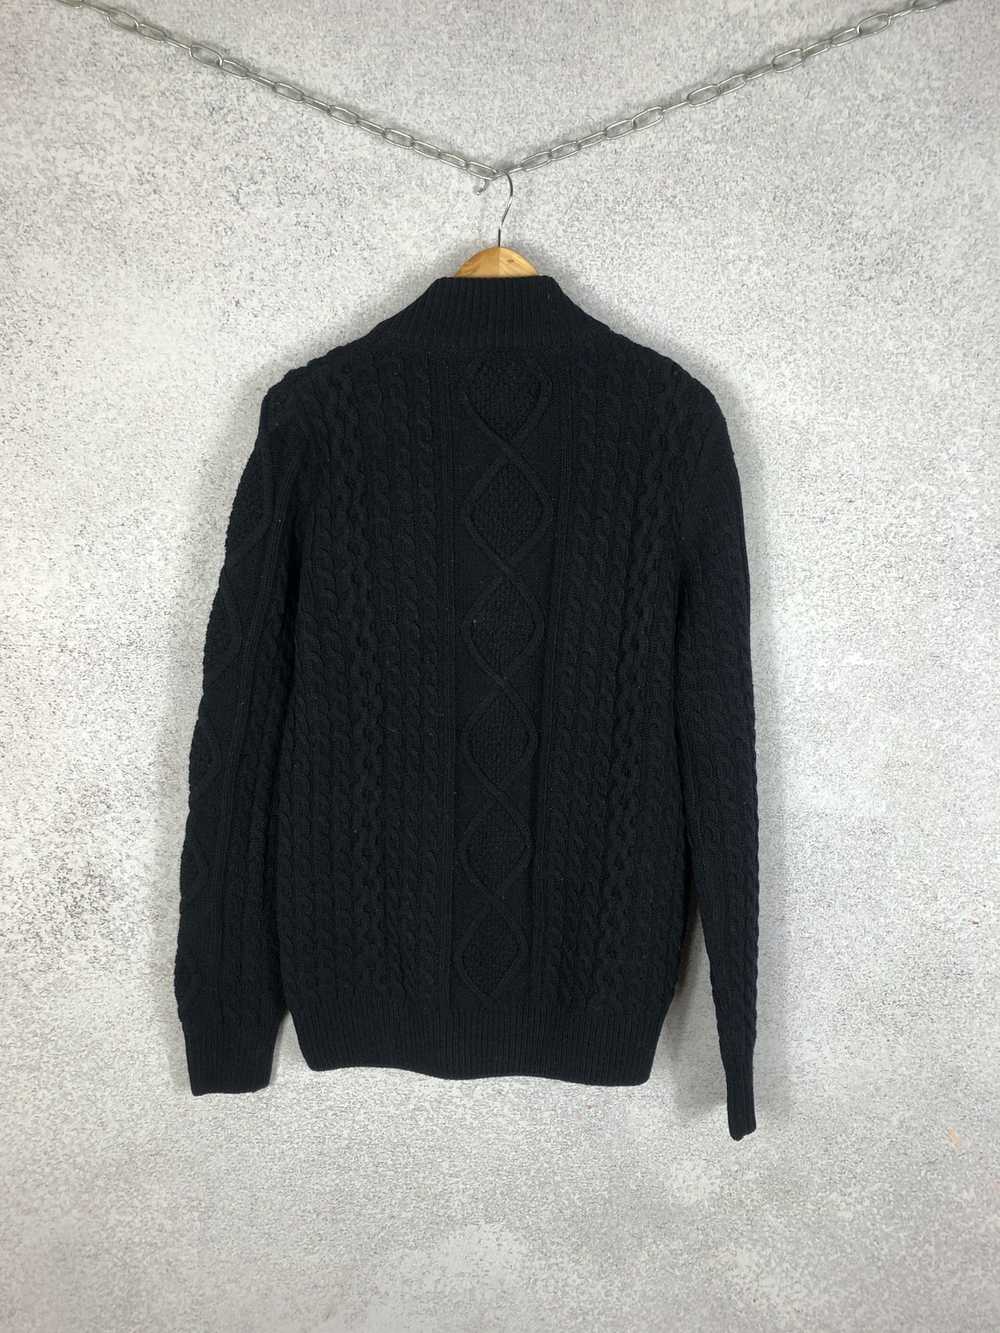 Barbour × Coloured Cable Knit Sweater Vintage Bar… - image 5